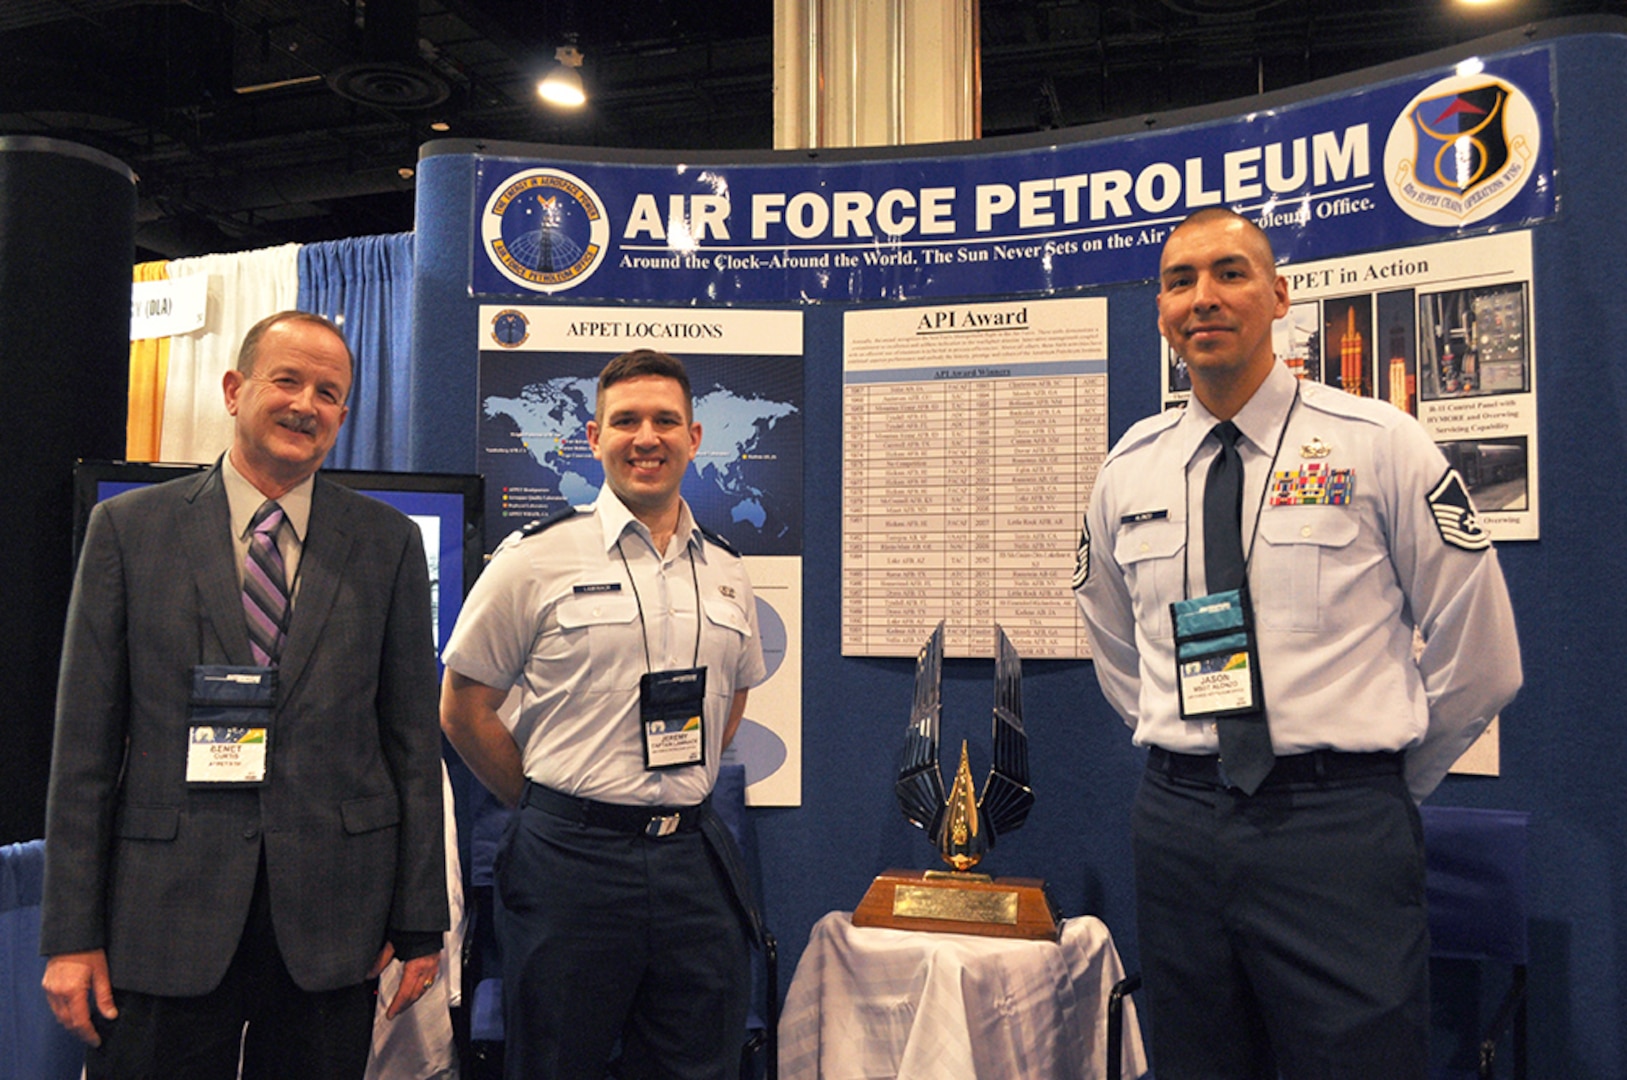 Air Force Petroleum Office representatives stand by booth